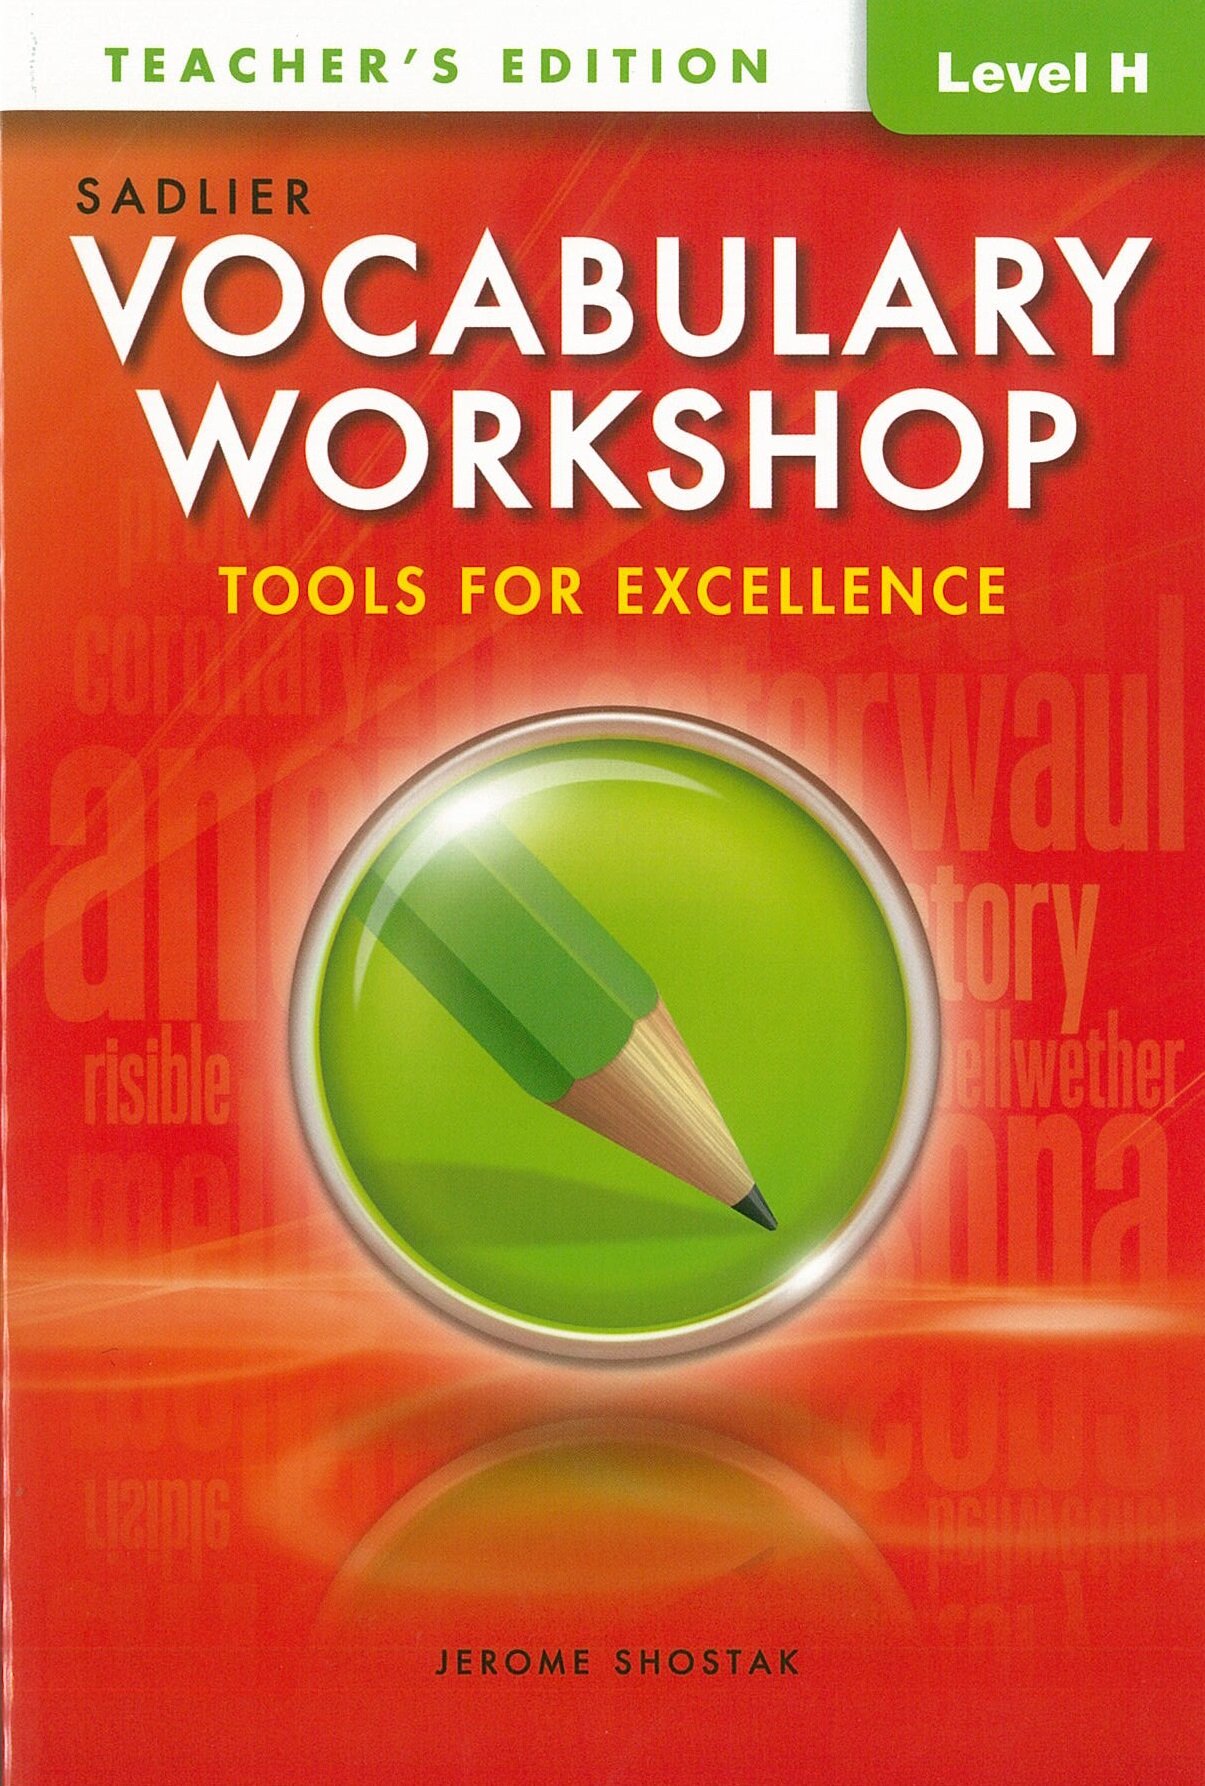 Vocabulary Workshop Tools for Excellence Teachers Edition H(G-12+) (Paperback)